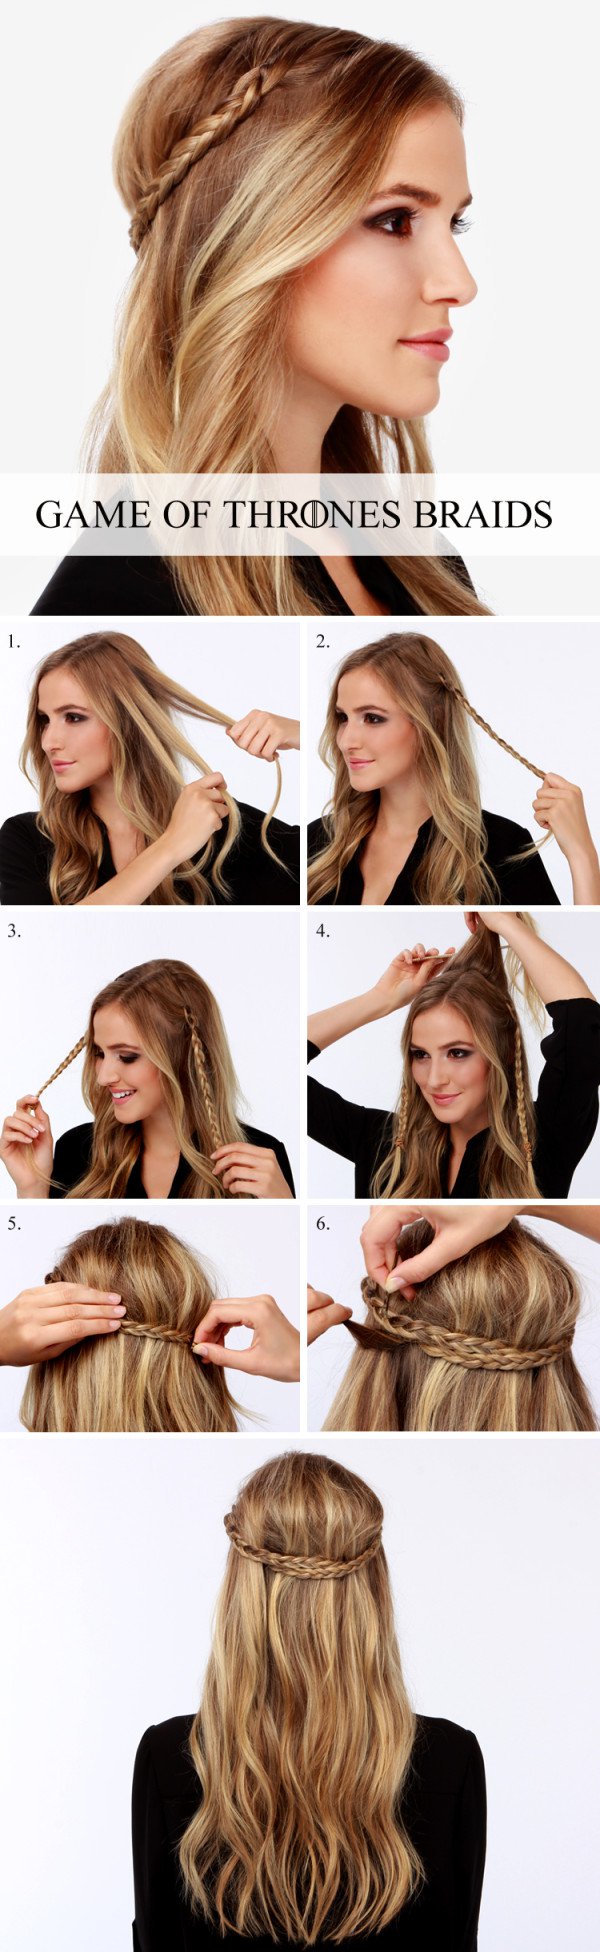 14 Cute And Easy Ways To Create Awesome Hairstyle For Less Than 2